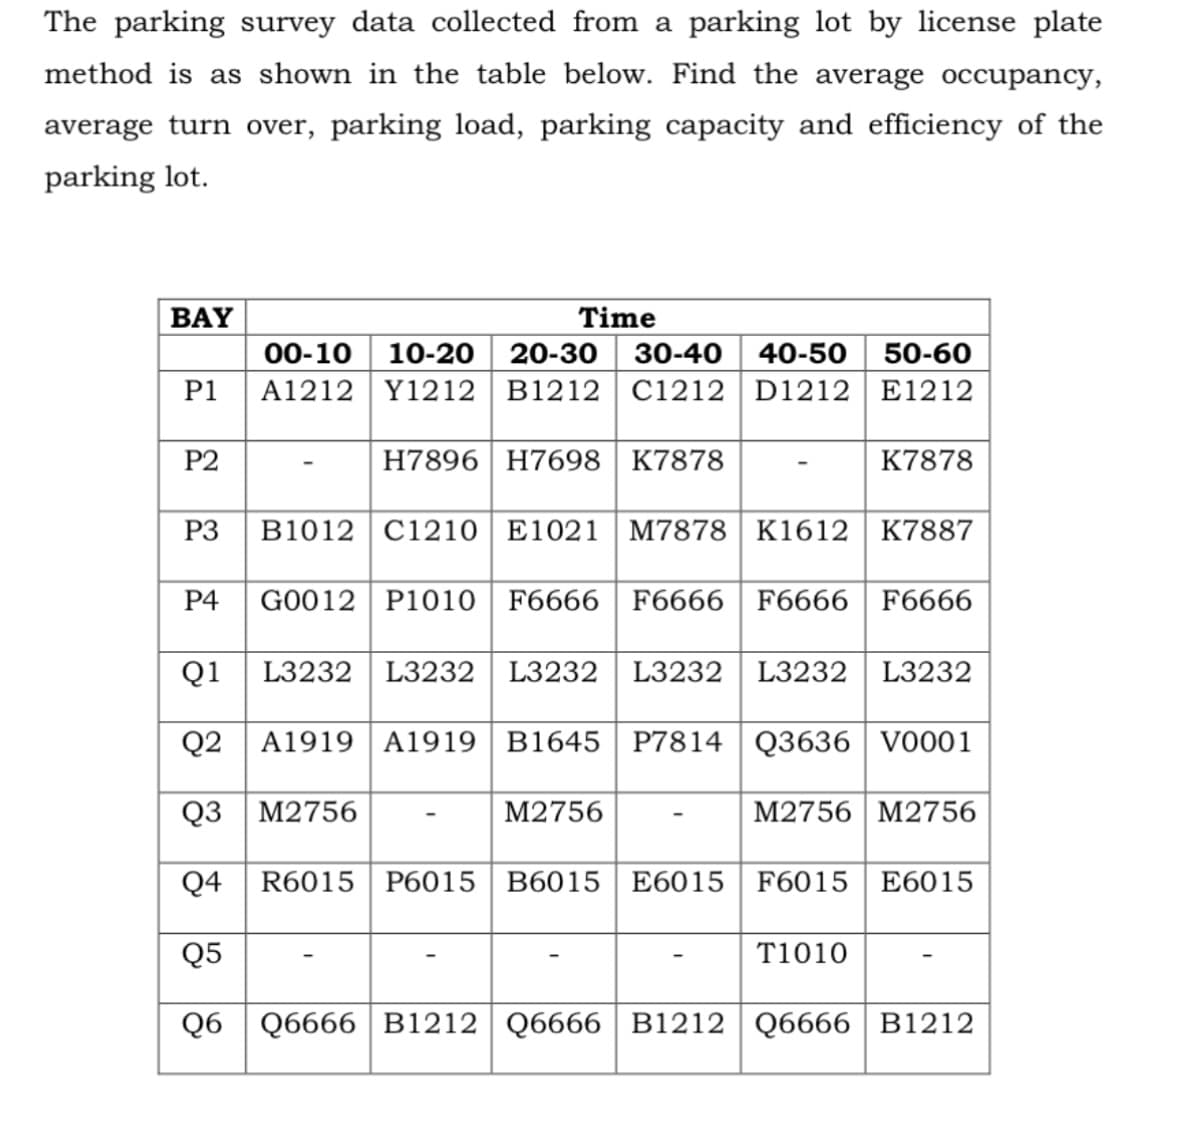 The parking survey data collected from a parking lot by license plate
method is as shown in the table below. Find the average occupancy,
average turn over, parking load, parking capacity and efficiency of the
parking lot.
BAY
P1
P2
P3
P4
Time
00-10 10-20 20-30 30-40 40-50 50-60
A1212 Y1212 B1212 C1212 D1212 E1212
H7896 H7698 K7878
B1012 C1210 E1021 M7878 K1612 K7887
K7878
G0012 P1010 F6666 F6666 F6666 F6666
Q1 L3232 L3232 L3232 L3232 L3232 L3232
Q2 A1919 A1919 B1645 P7814 Q3636 V0001
Q3 M2756
M2756 M2756
Q4 R6015 P6015 B6015 E6015
Q5
Q6 Q6666 B1212 Q6666 B1212 Q6666 B1212
M2756
F6015 E6015
T1010